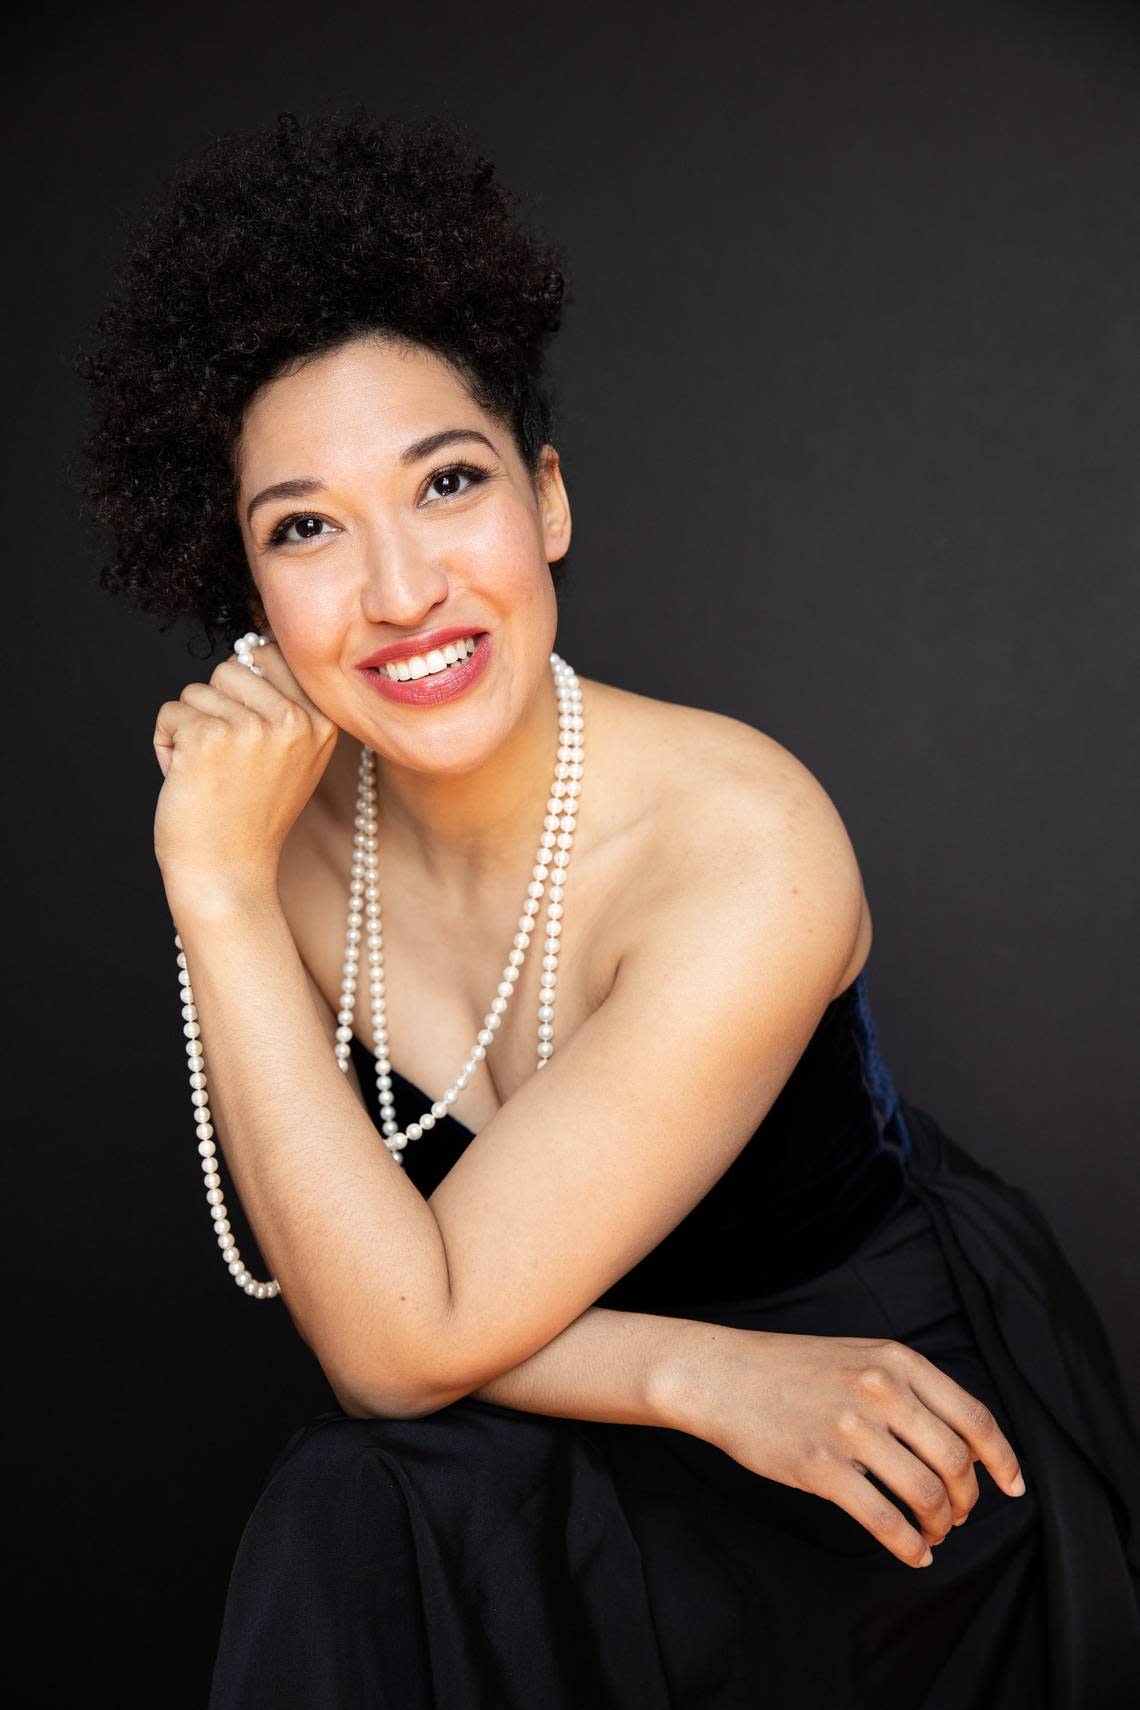 Vocalist Julia Bullock will perform music from the Harlem Renaissance at New World Center in Miami Beach Friday.